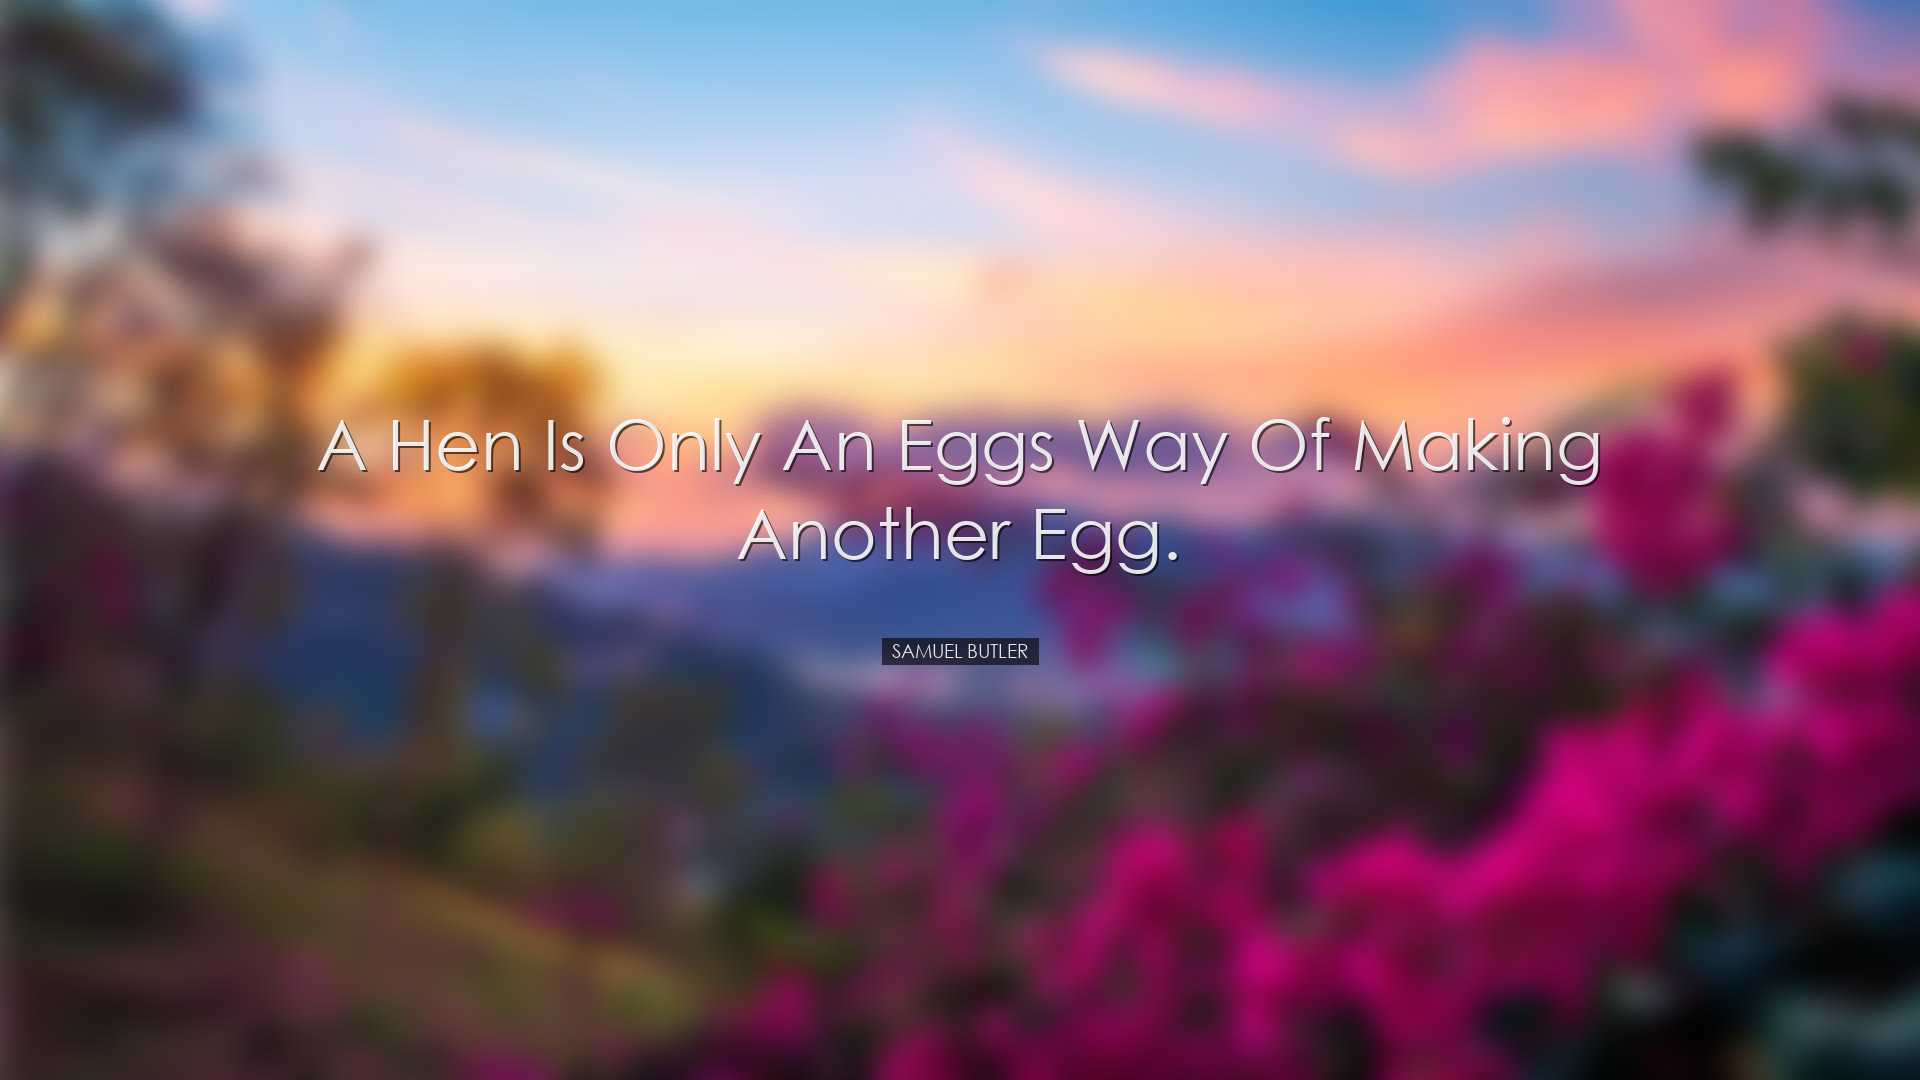 A hen is only an eggs way of making another egg. - Samuel Butler